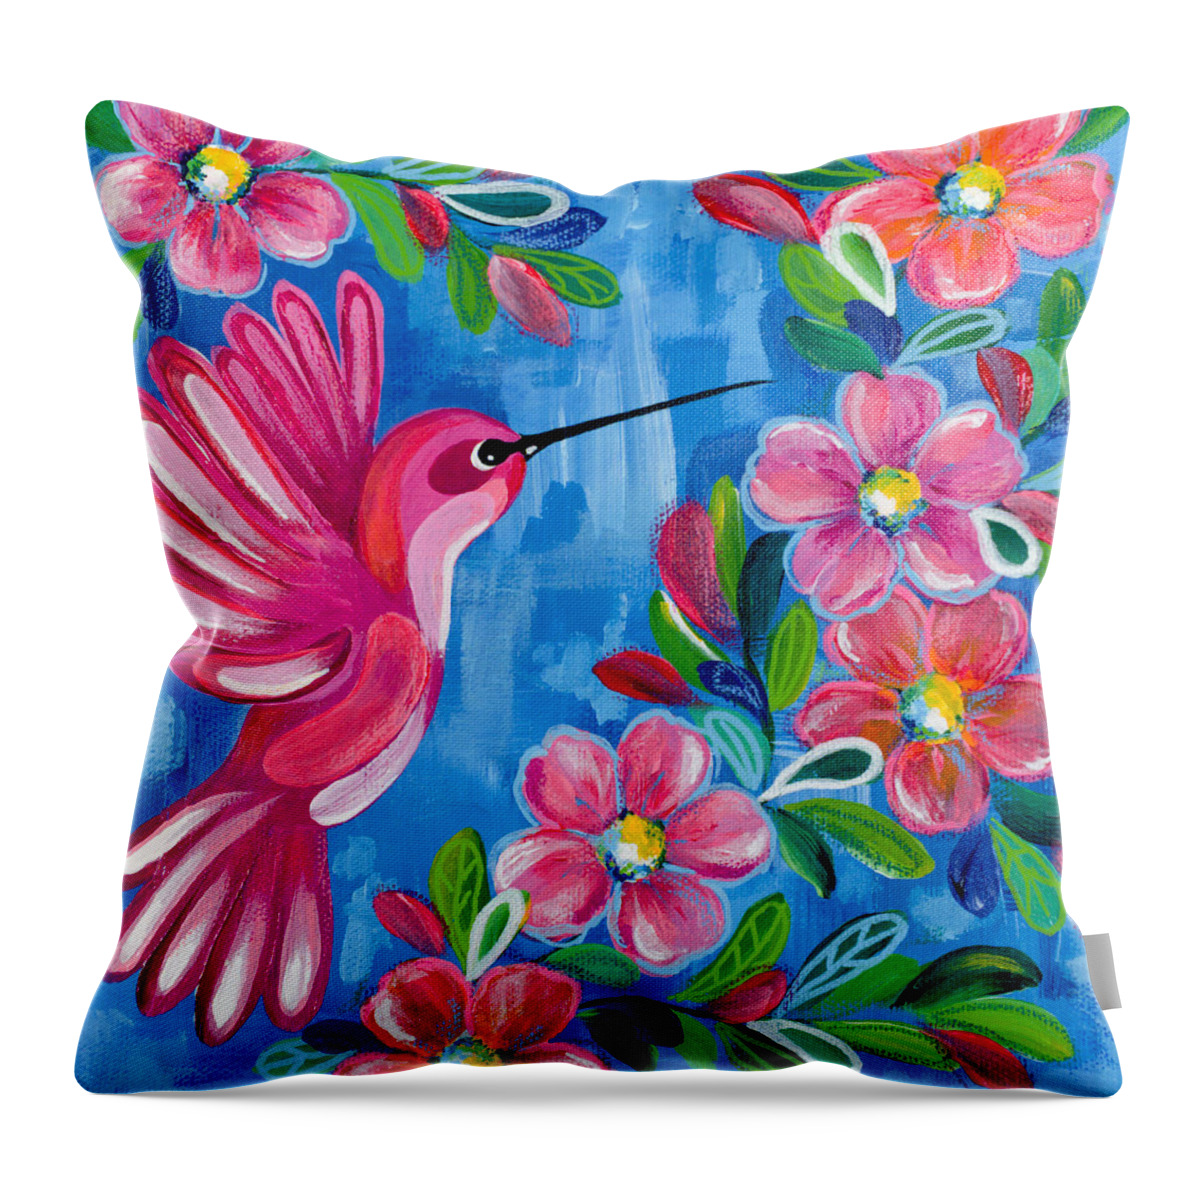 Hummingbird Throw Pillow featuring the painting Spread Your Wings by Beth Ann Scott